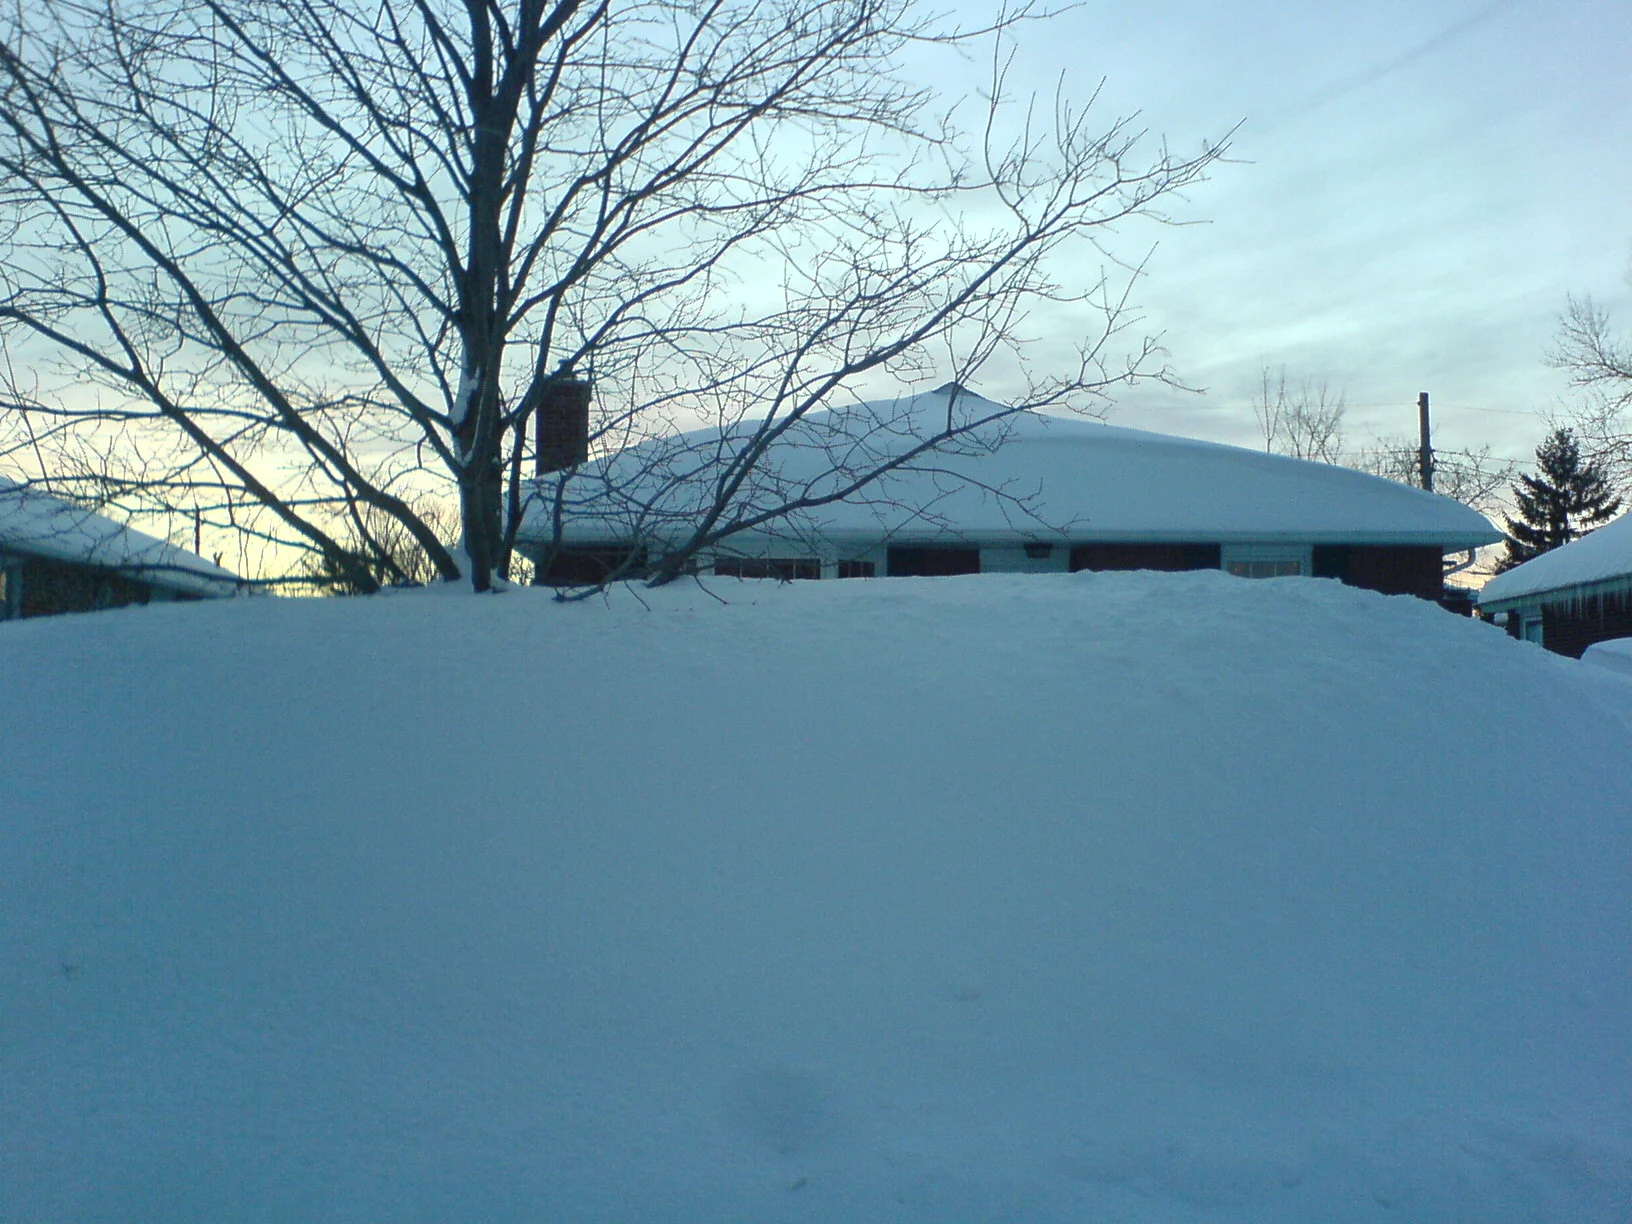 House in Ottawa Snowstorm